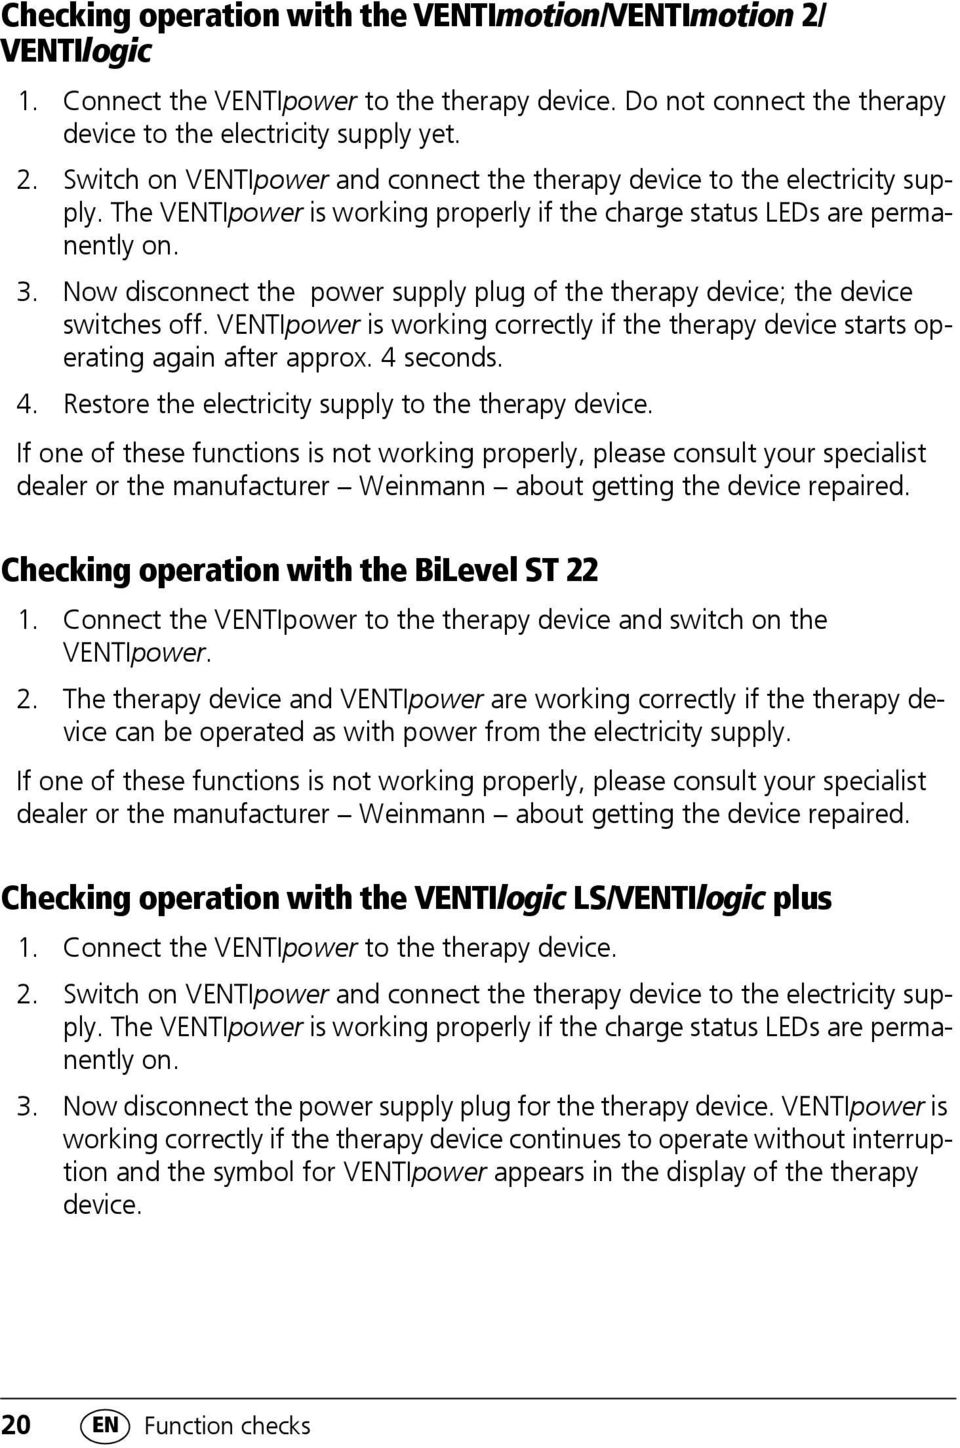 VENTIpower is working correctly if the therapy device starts operating again after approx. 4 seconds. 4. Restore the electricity supply to the therapy device.